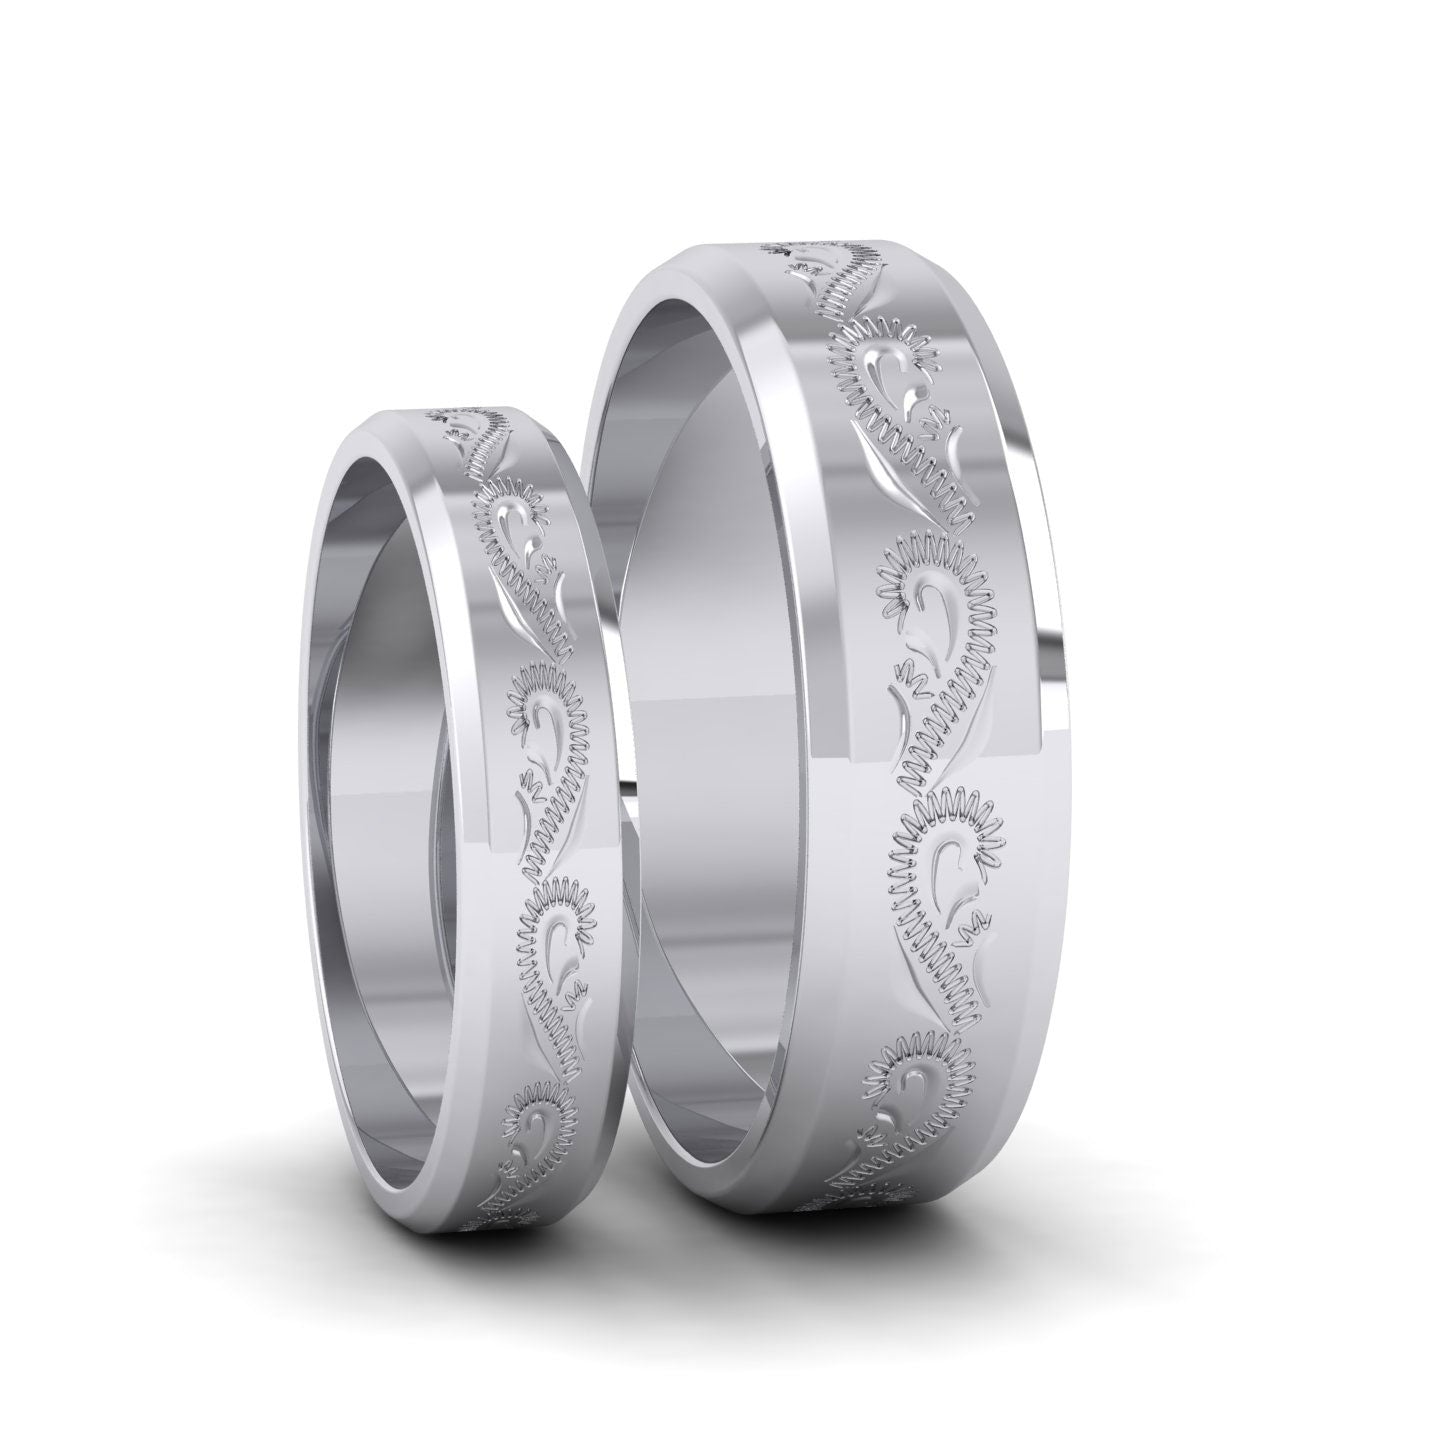 Engraved 14ct White Gold 6mm Flat Wedding Ring With Bevelled Edge